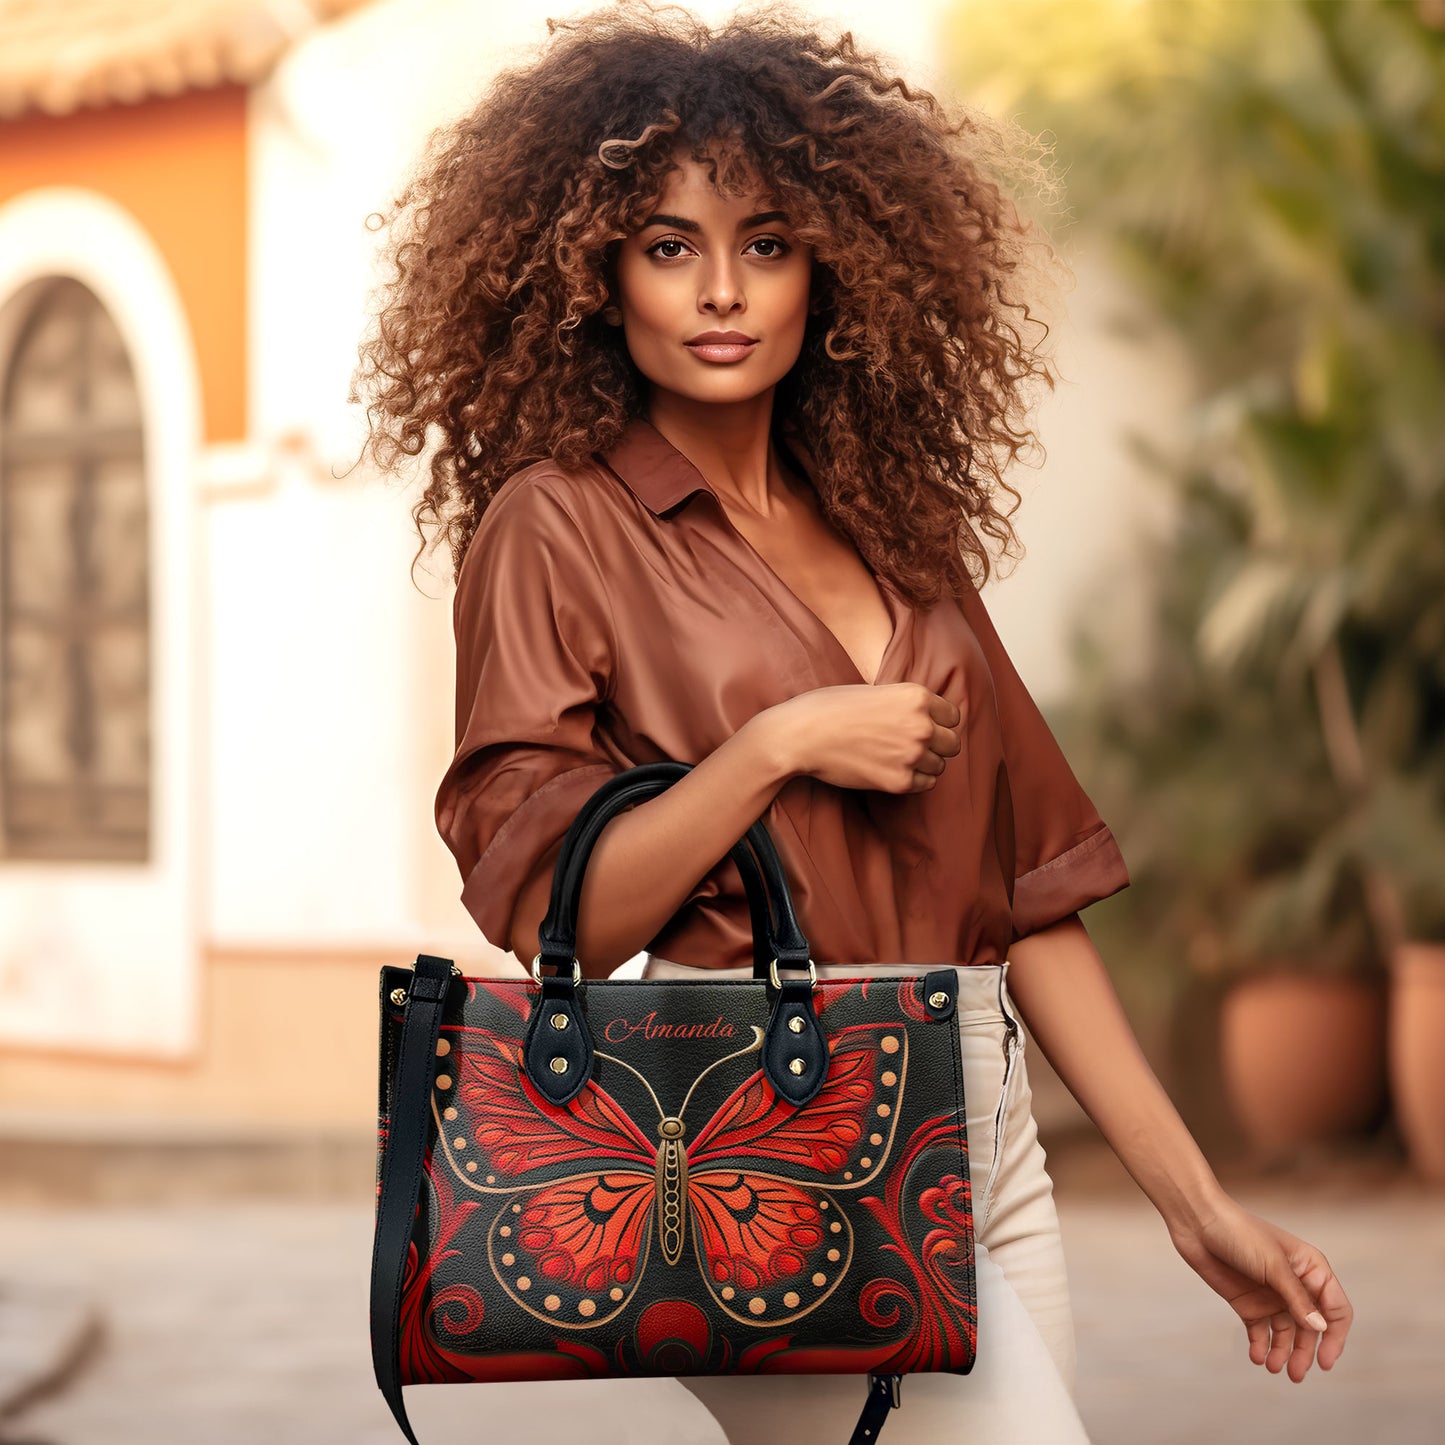 Red Butterfly - Personalized Leather Handbag MSM01